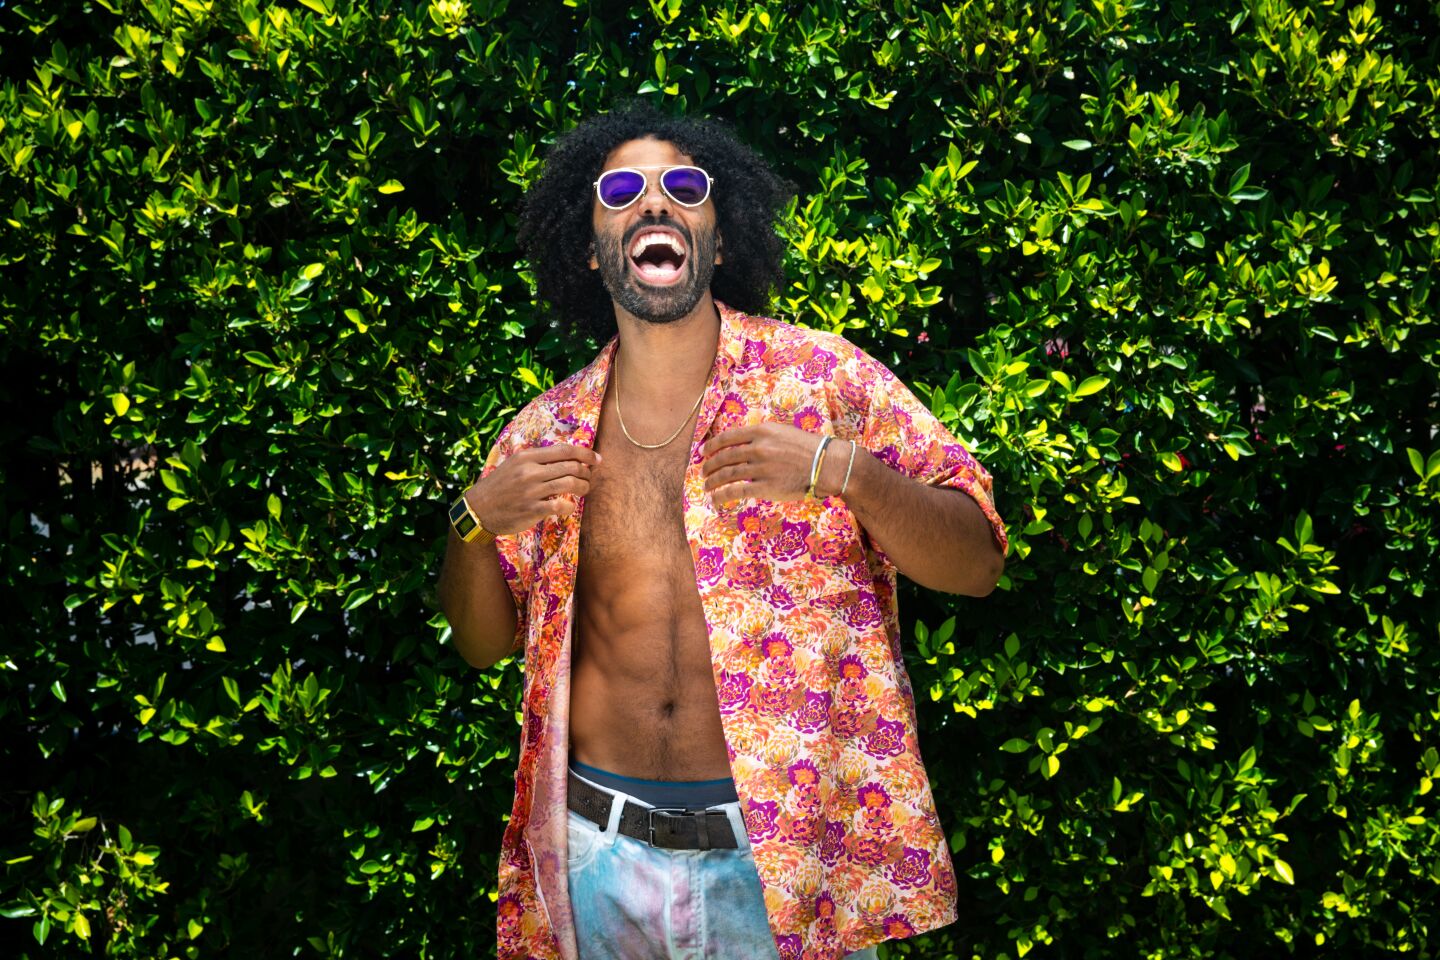 Actor, rapper and Hamilton star Daveed Diggs is photographed at his home, during the coronavirus pandemic